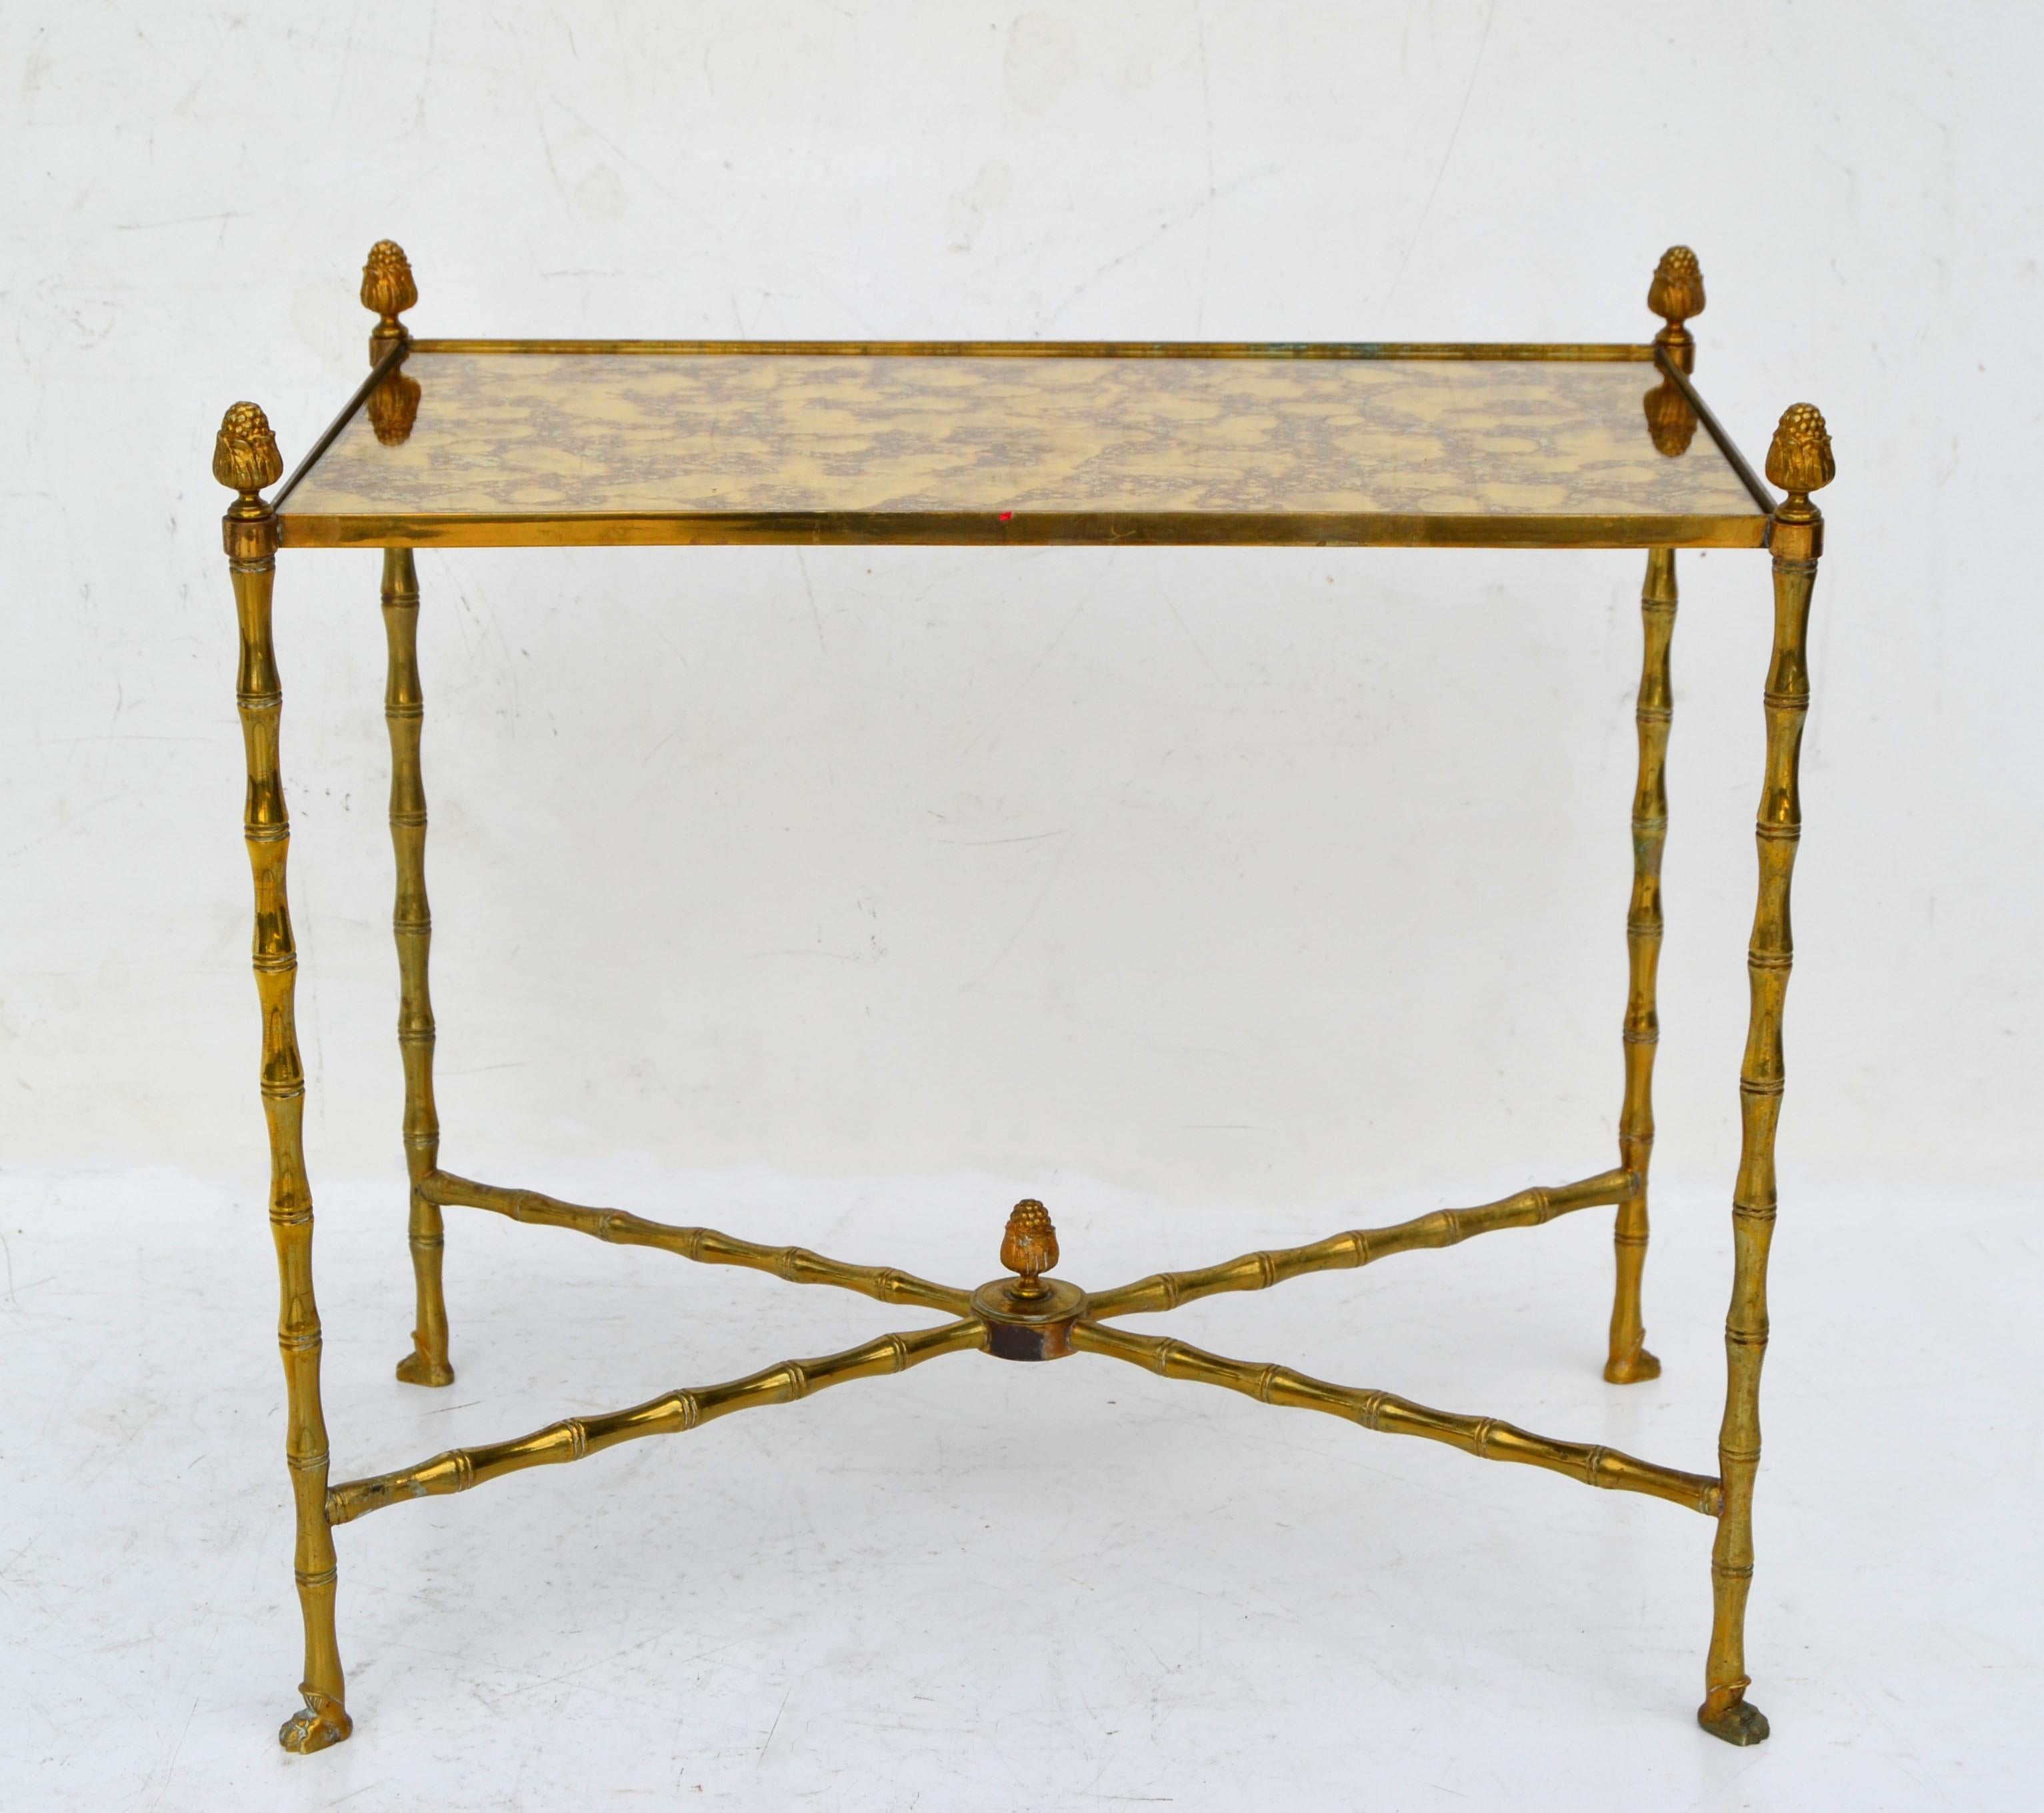 Maison Bagués rectangular side table, end table, sofa table.
Faux bamboo bronze and brass decorative cross base with an antique gold cloudy mirror top.
 